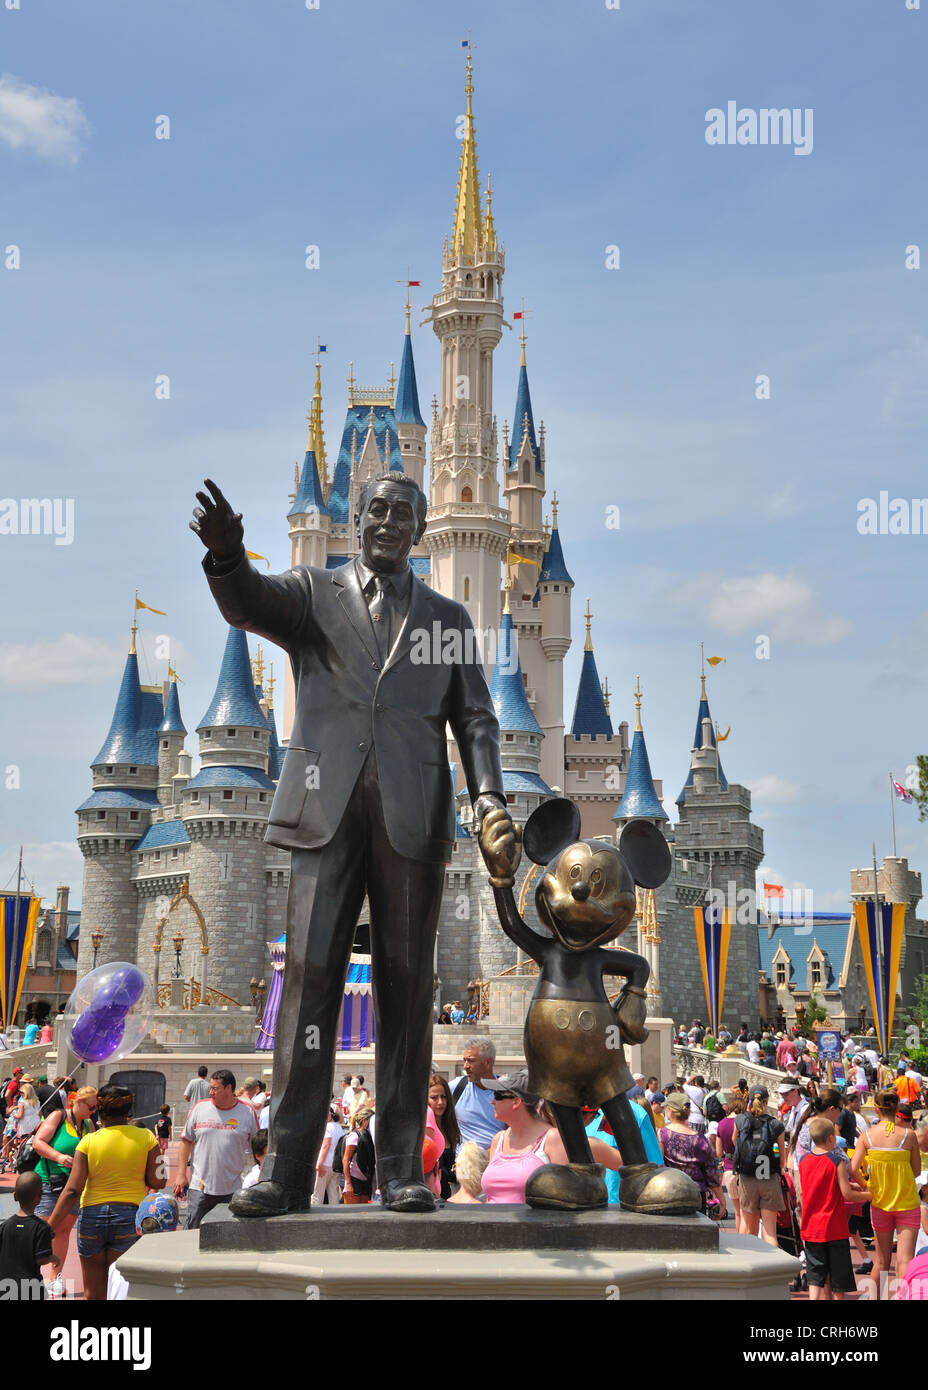 Statue of Walt Disney and Mickey mouse at the Magic Kingdom theme park in Orlando, Florida Stock Photo